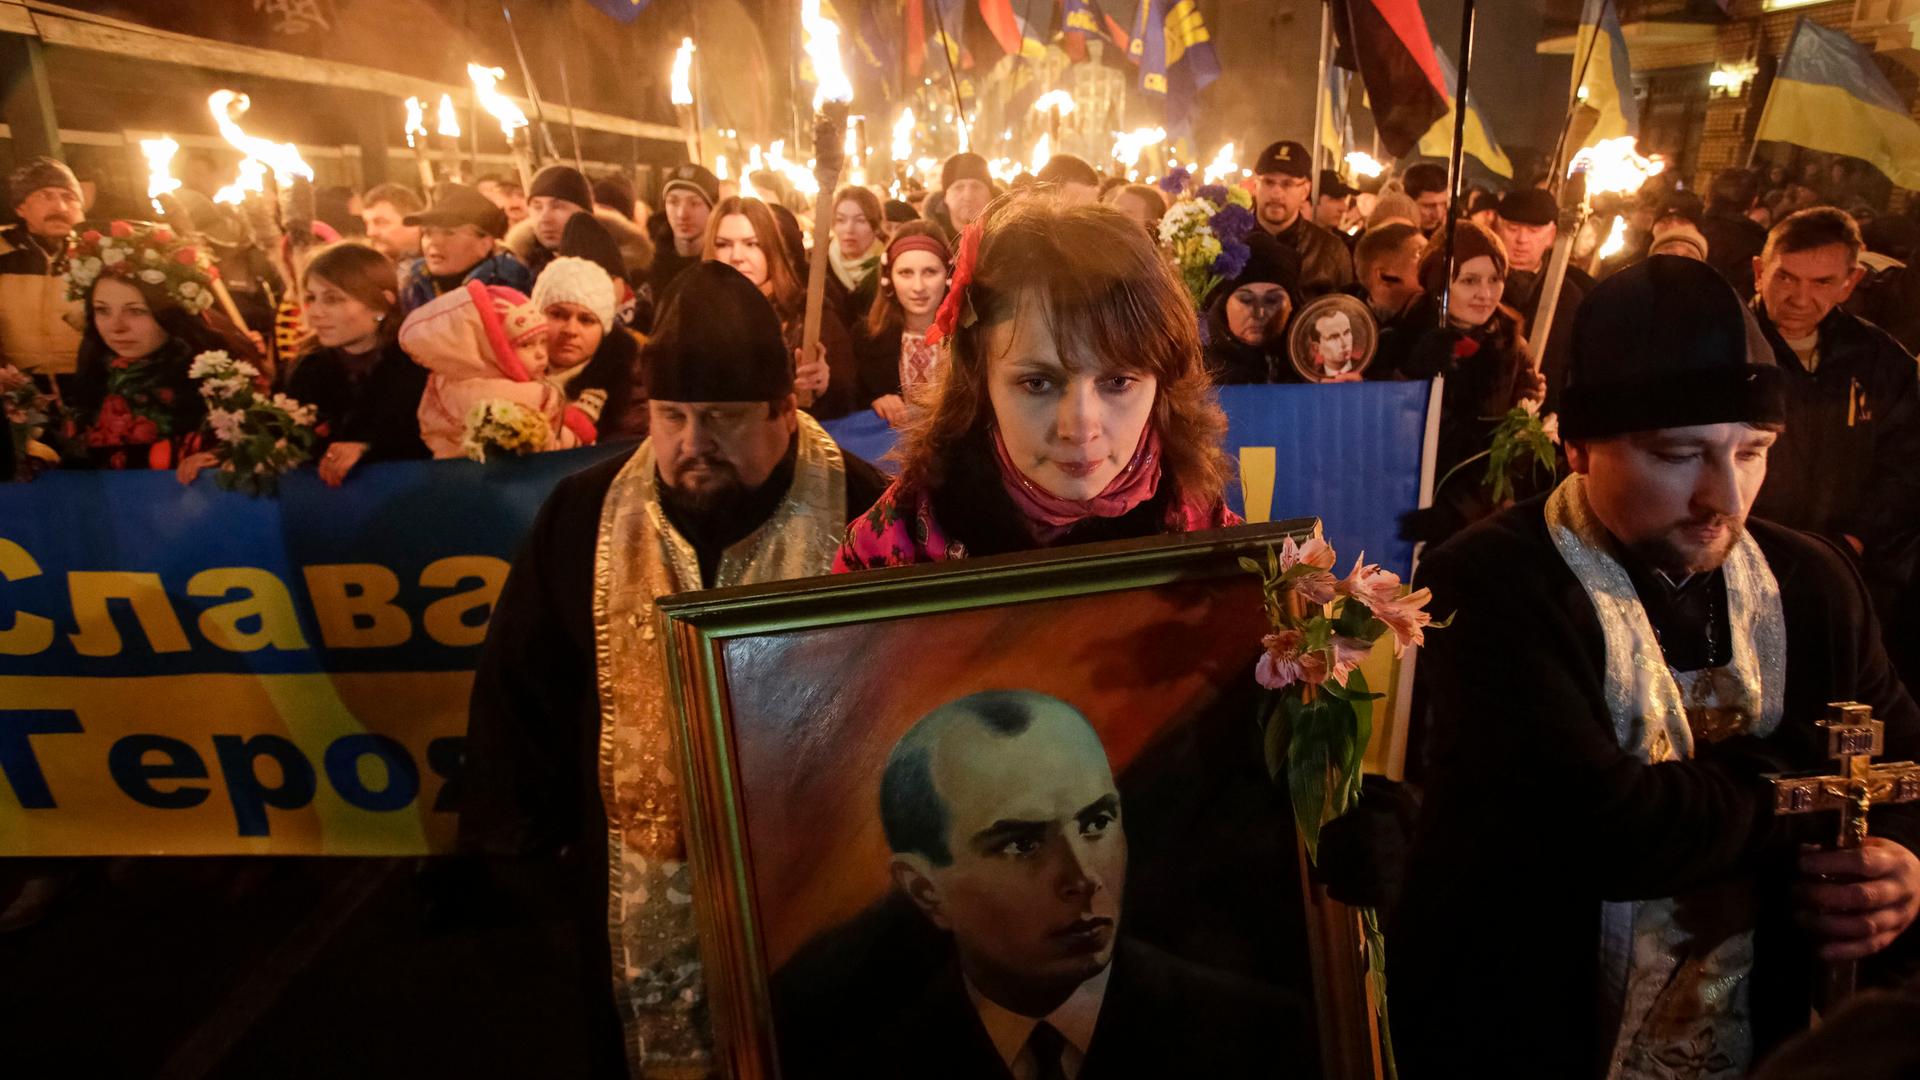 Activists of the Svoboda (Freedom) Ukrainian nationalist party hold torches as they take part in a rally to mark the 105th year since the birth of Stepan Bandera, one of the founders of the Organization of Ukrainian Nationalists (OUN), in Kiev. The portra